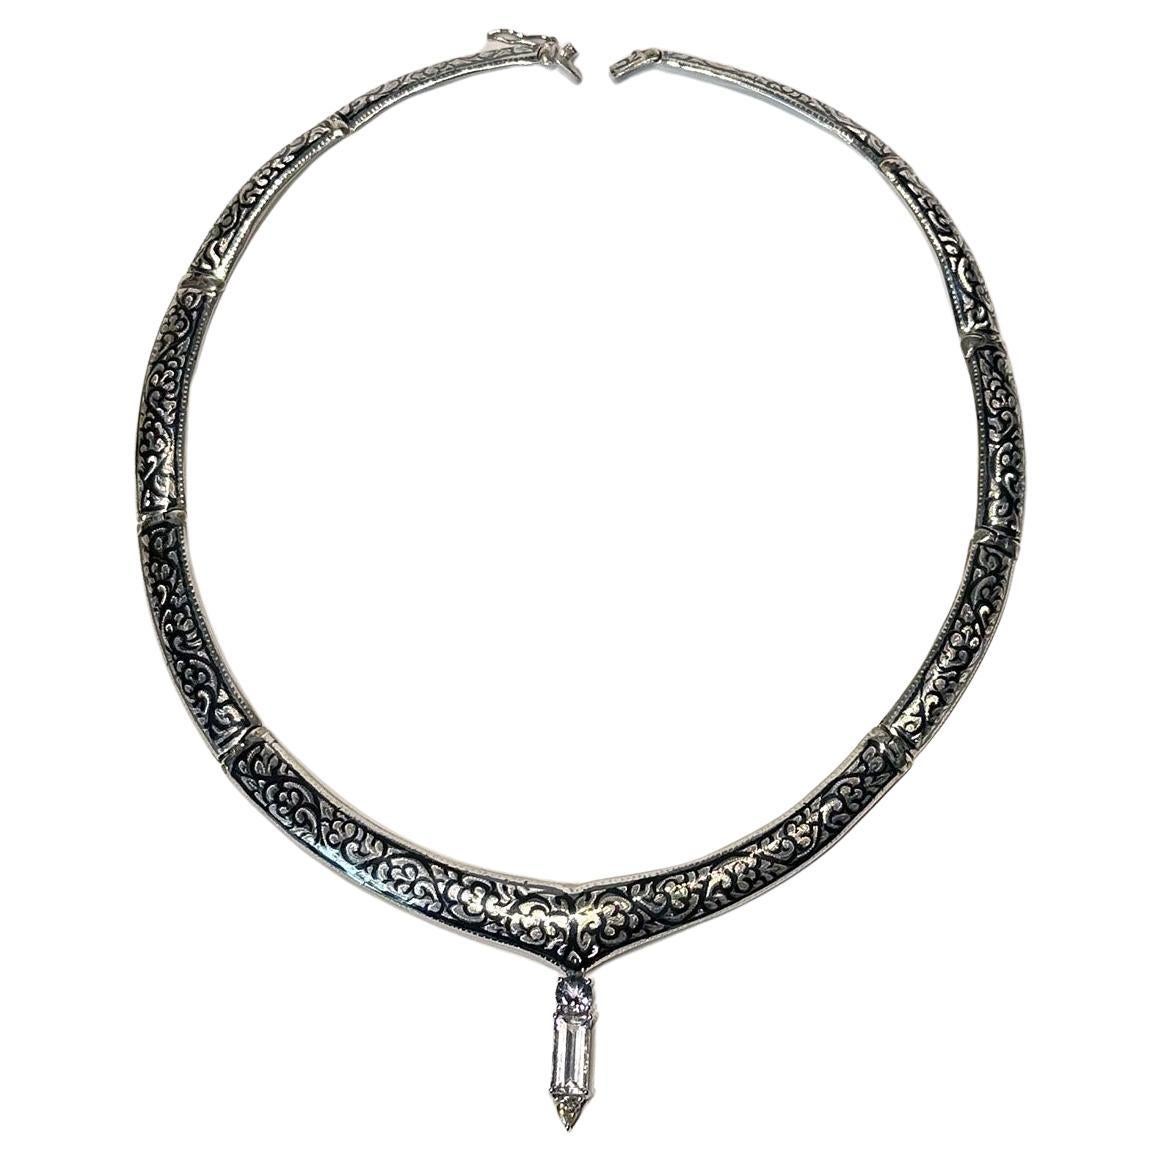 A Silver Nielloware Necklace with a removable White Gold Jeweled Pendant For Sale